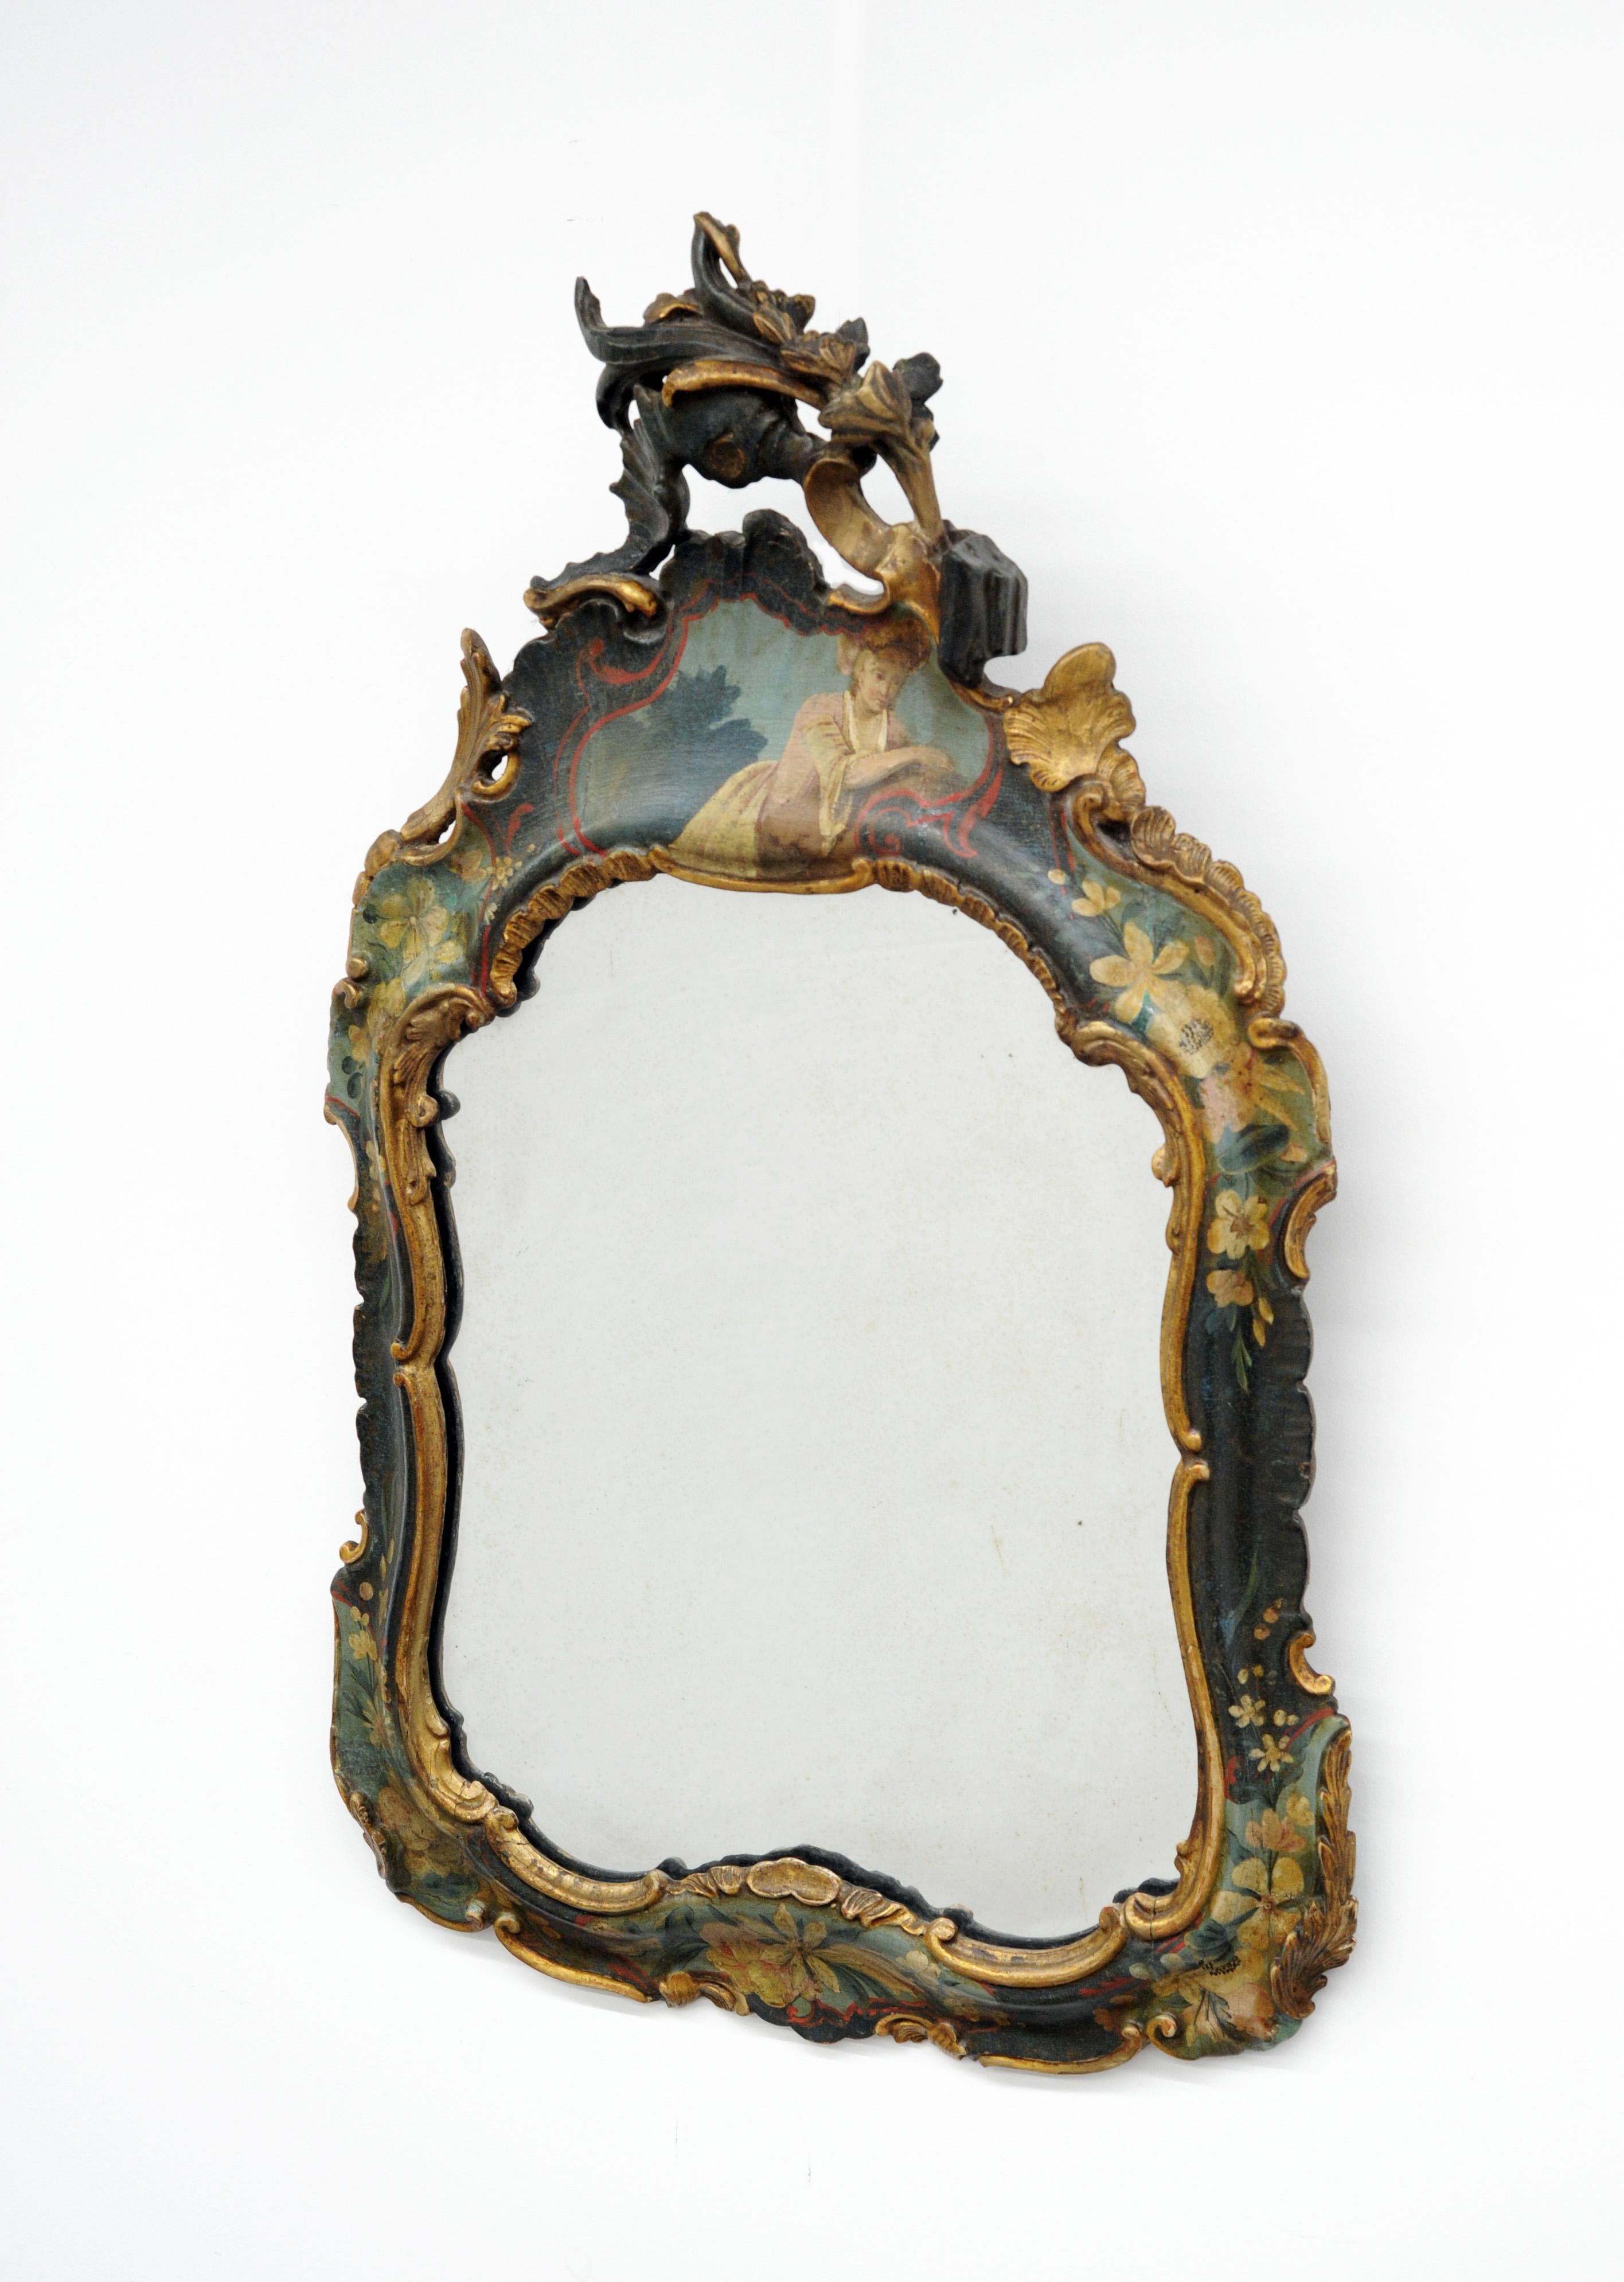 Italian 19th Century Carved Lacquered Partially Gilded Venice Wall Mirror